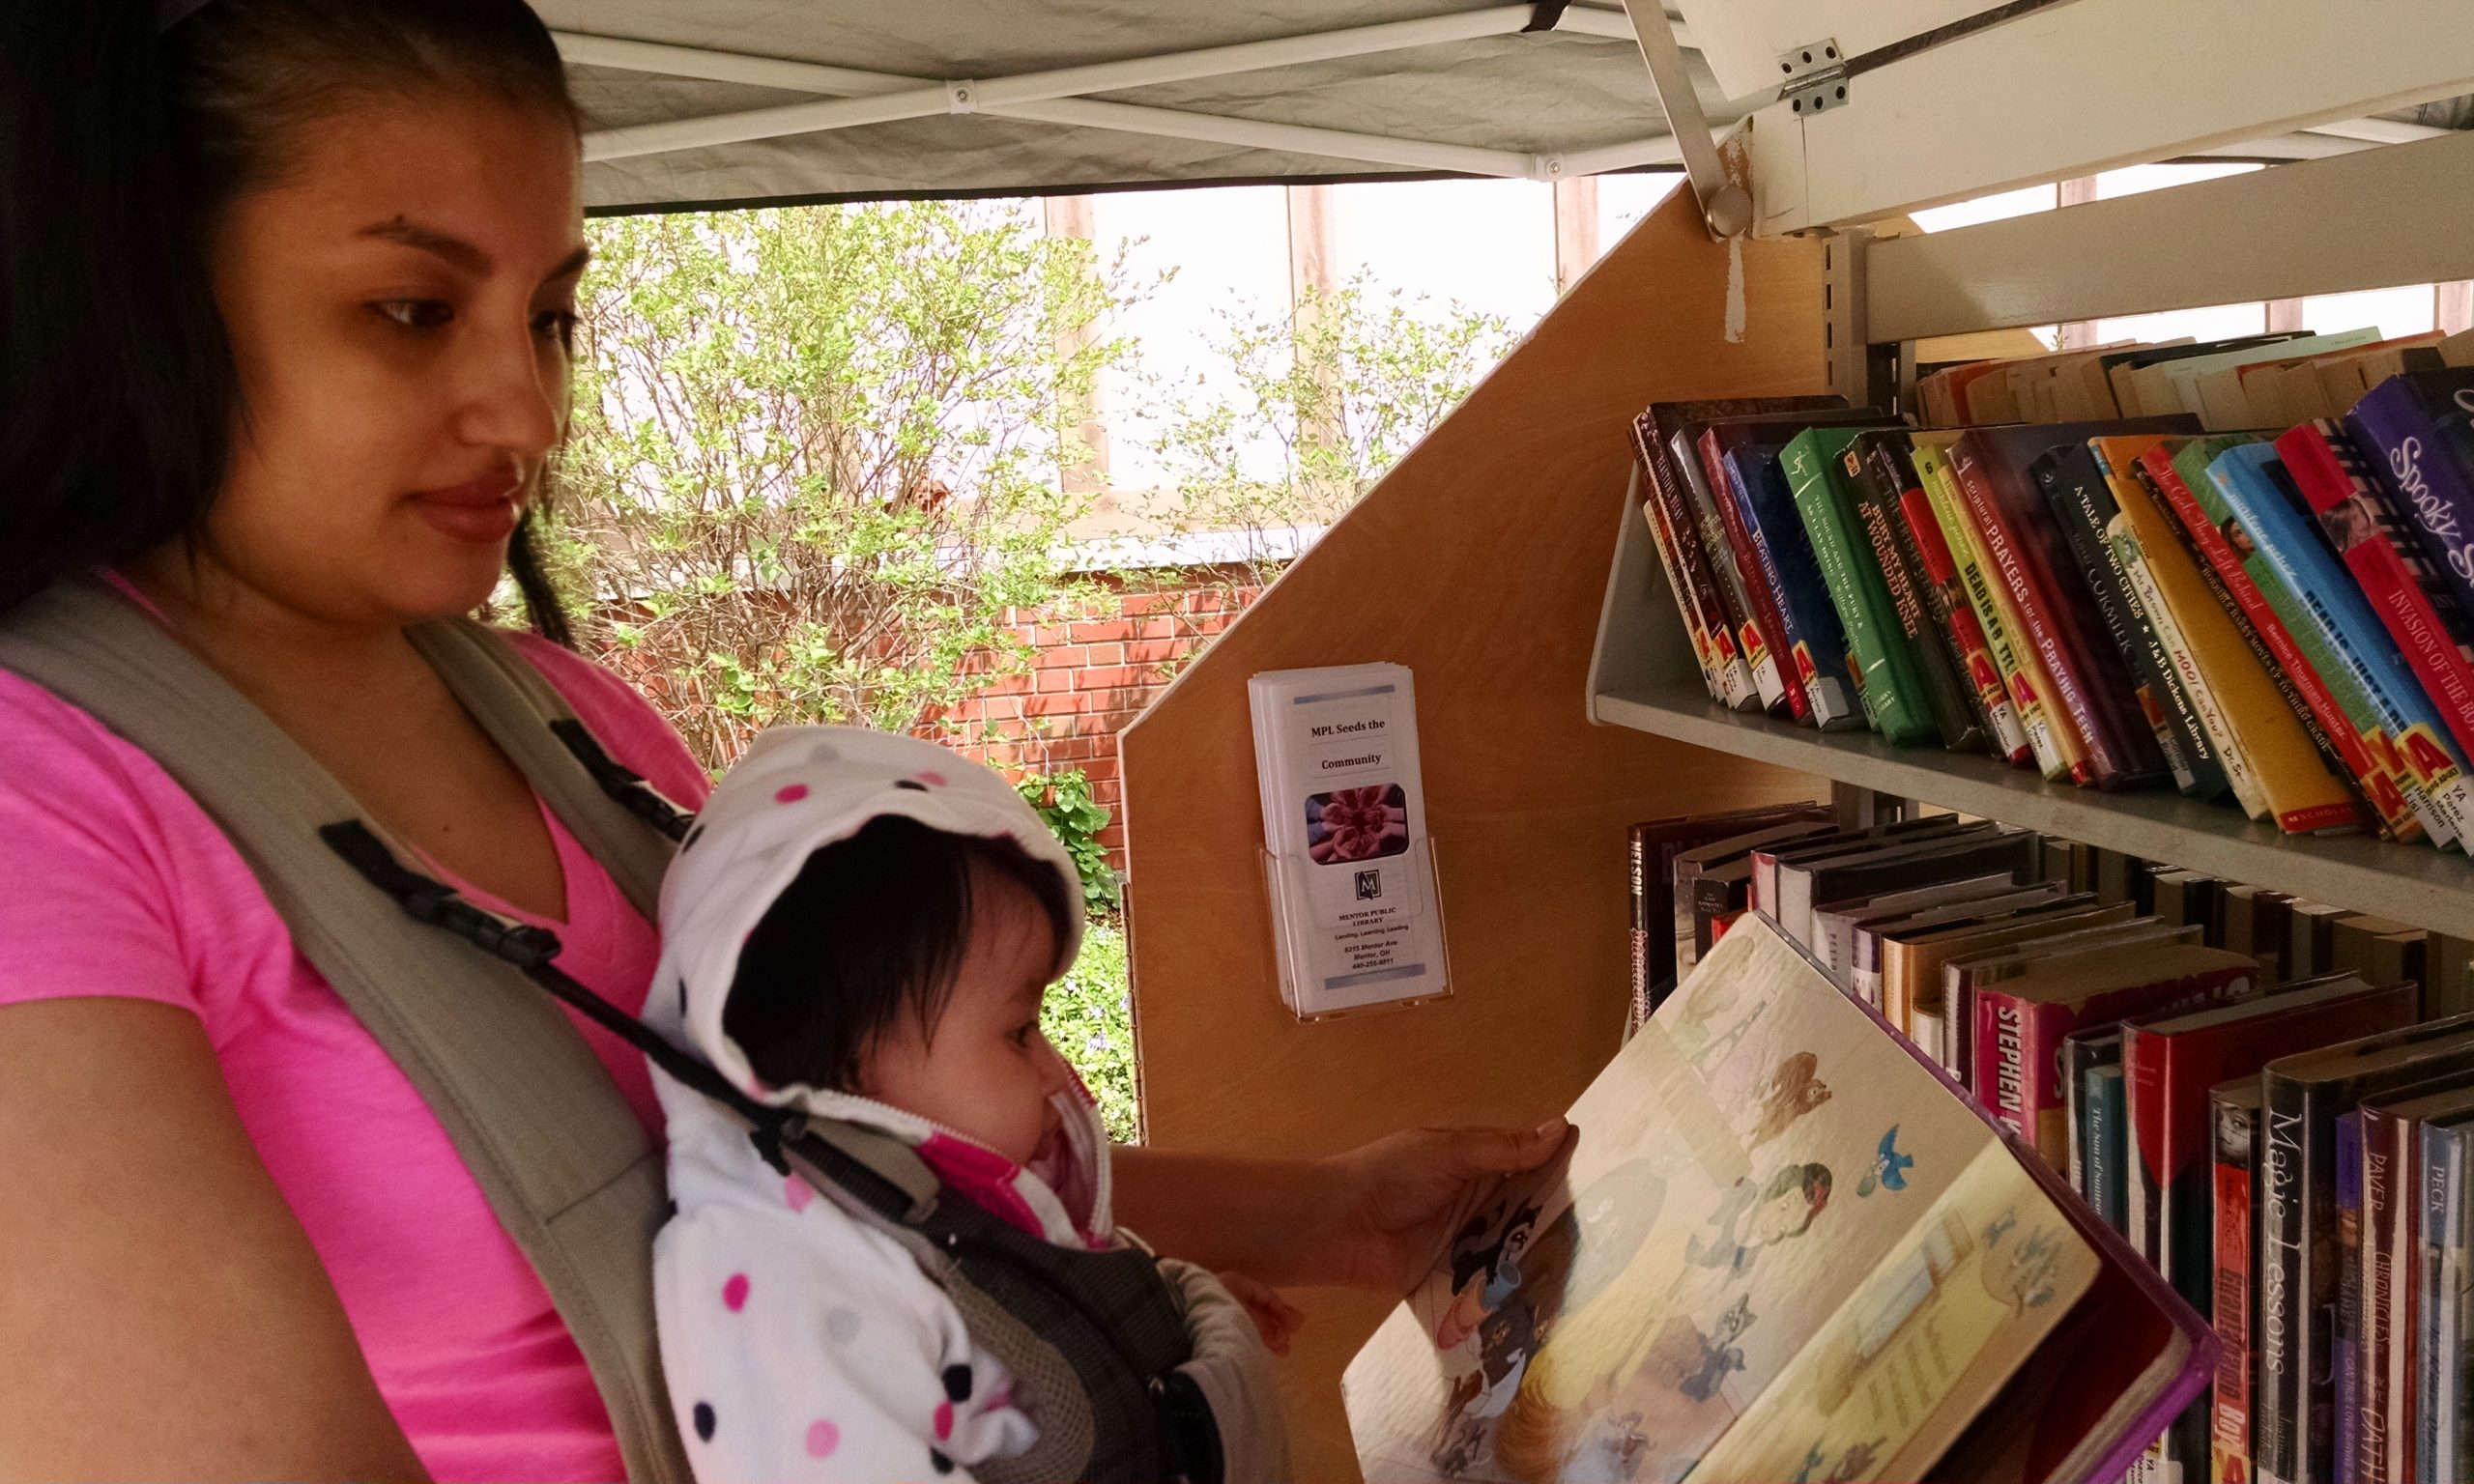 Catalea and her mother enjoy an impromptu story time by the Pop-Up Library during an Earth Day Celebration at Wildwood Cultural Center in Mentor